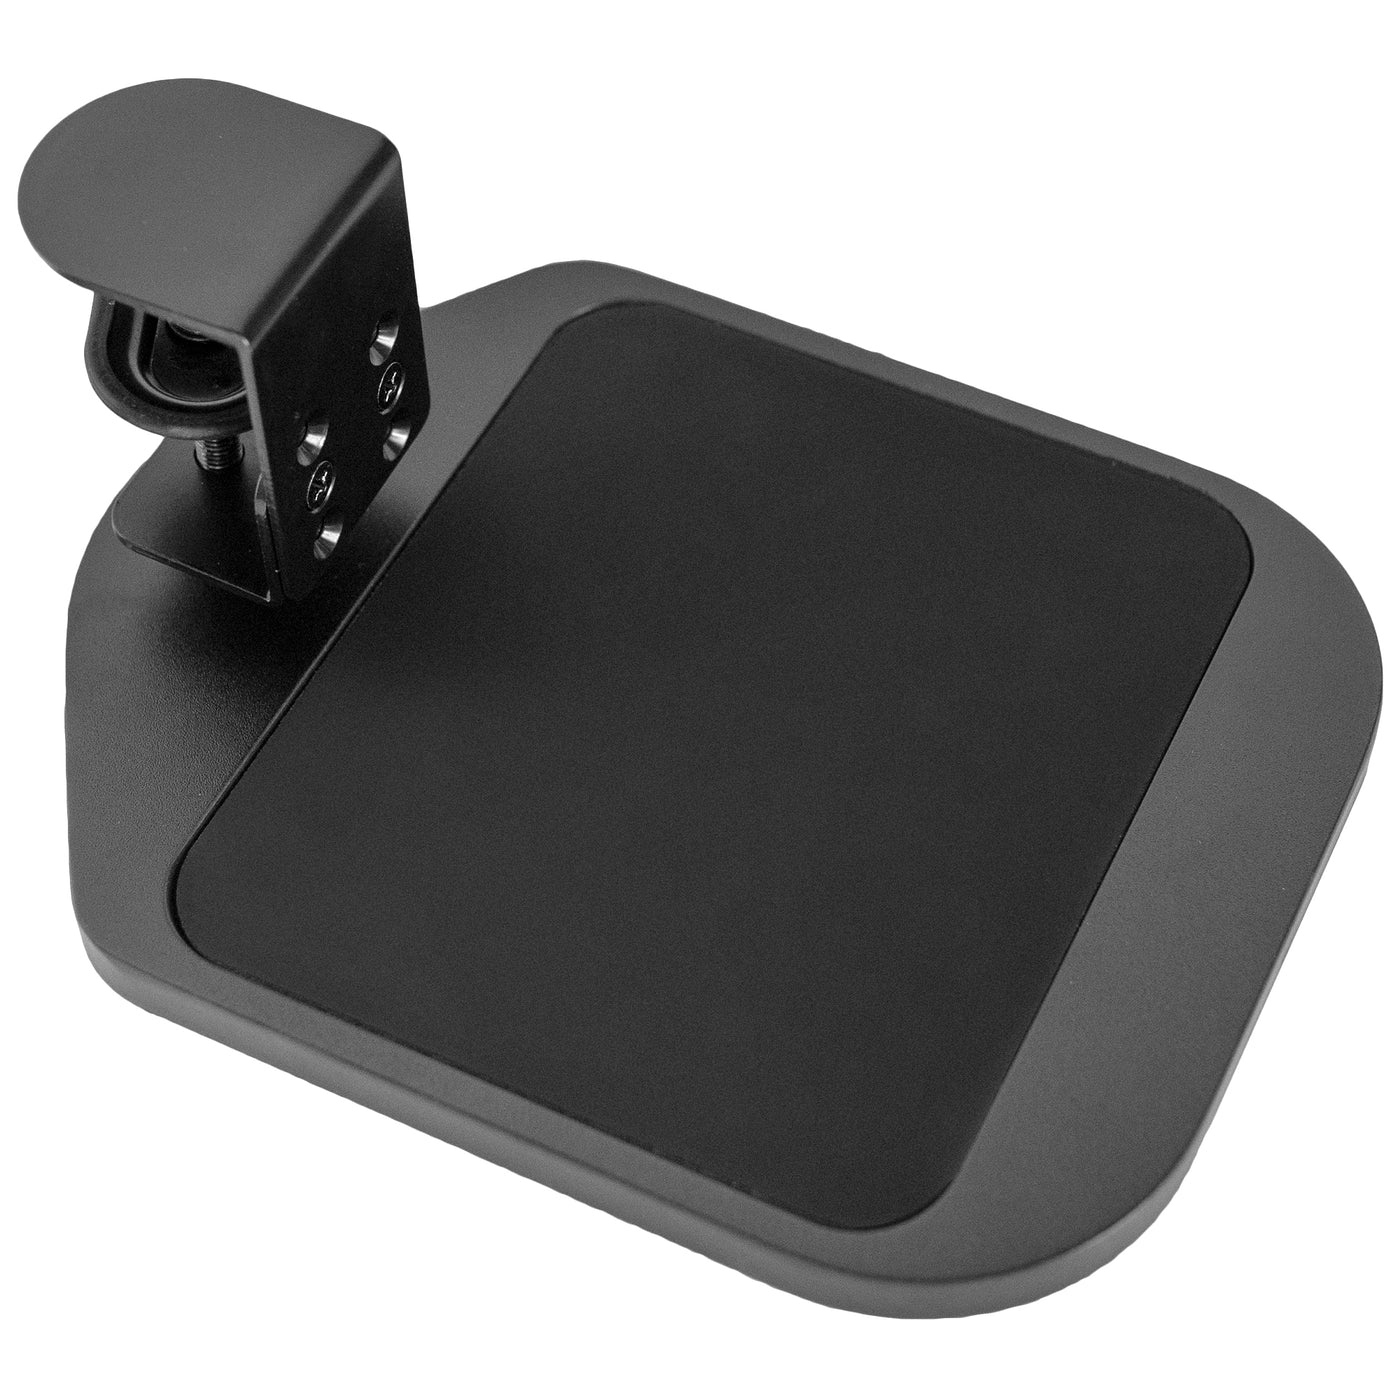 A lightweight clamp on mouse pad.